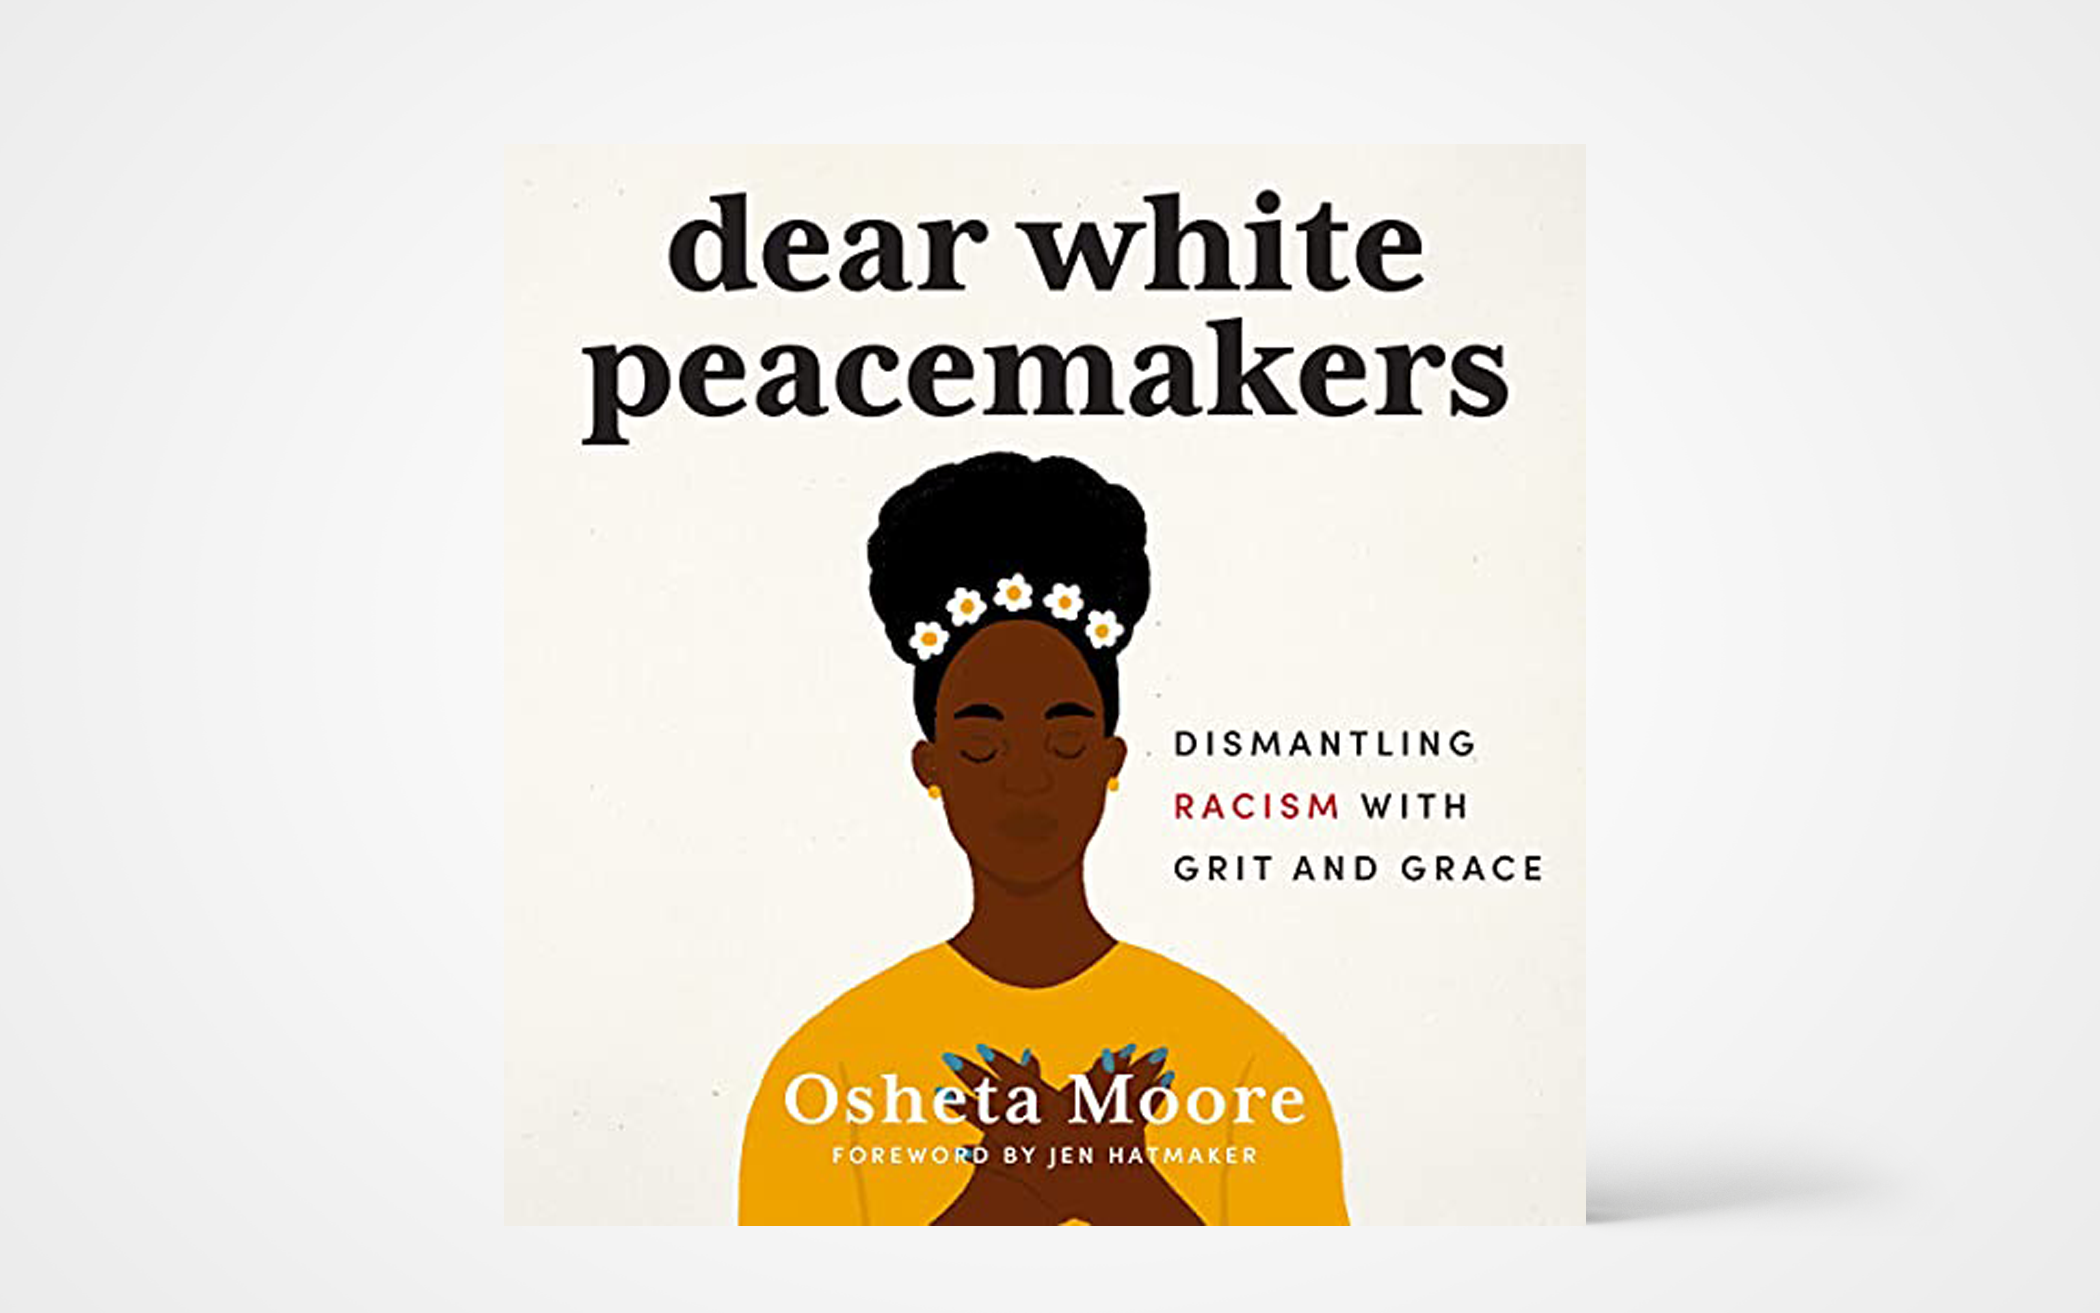 Dear White Peacemakers